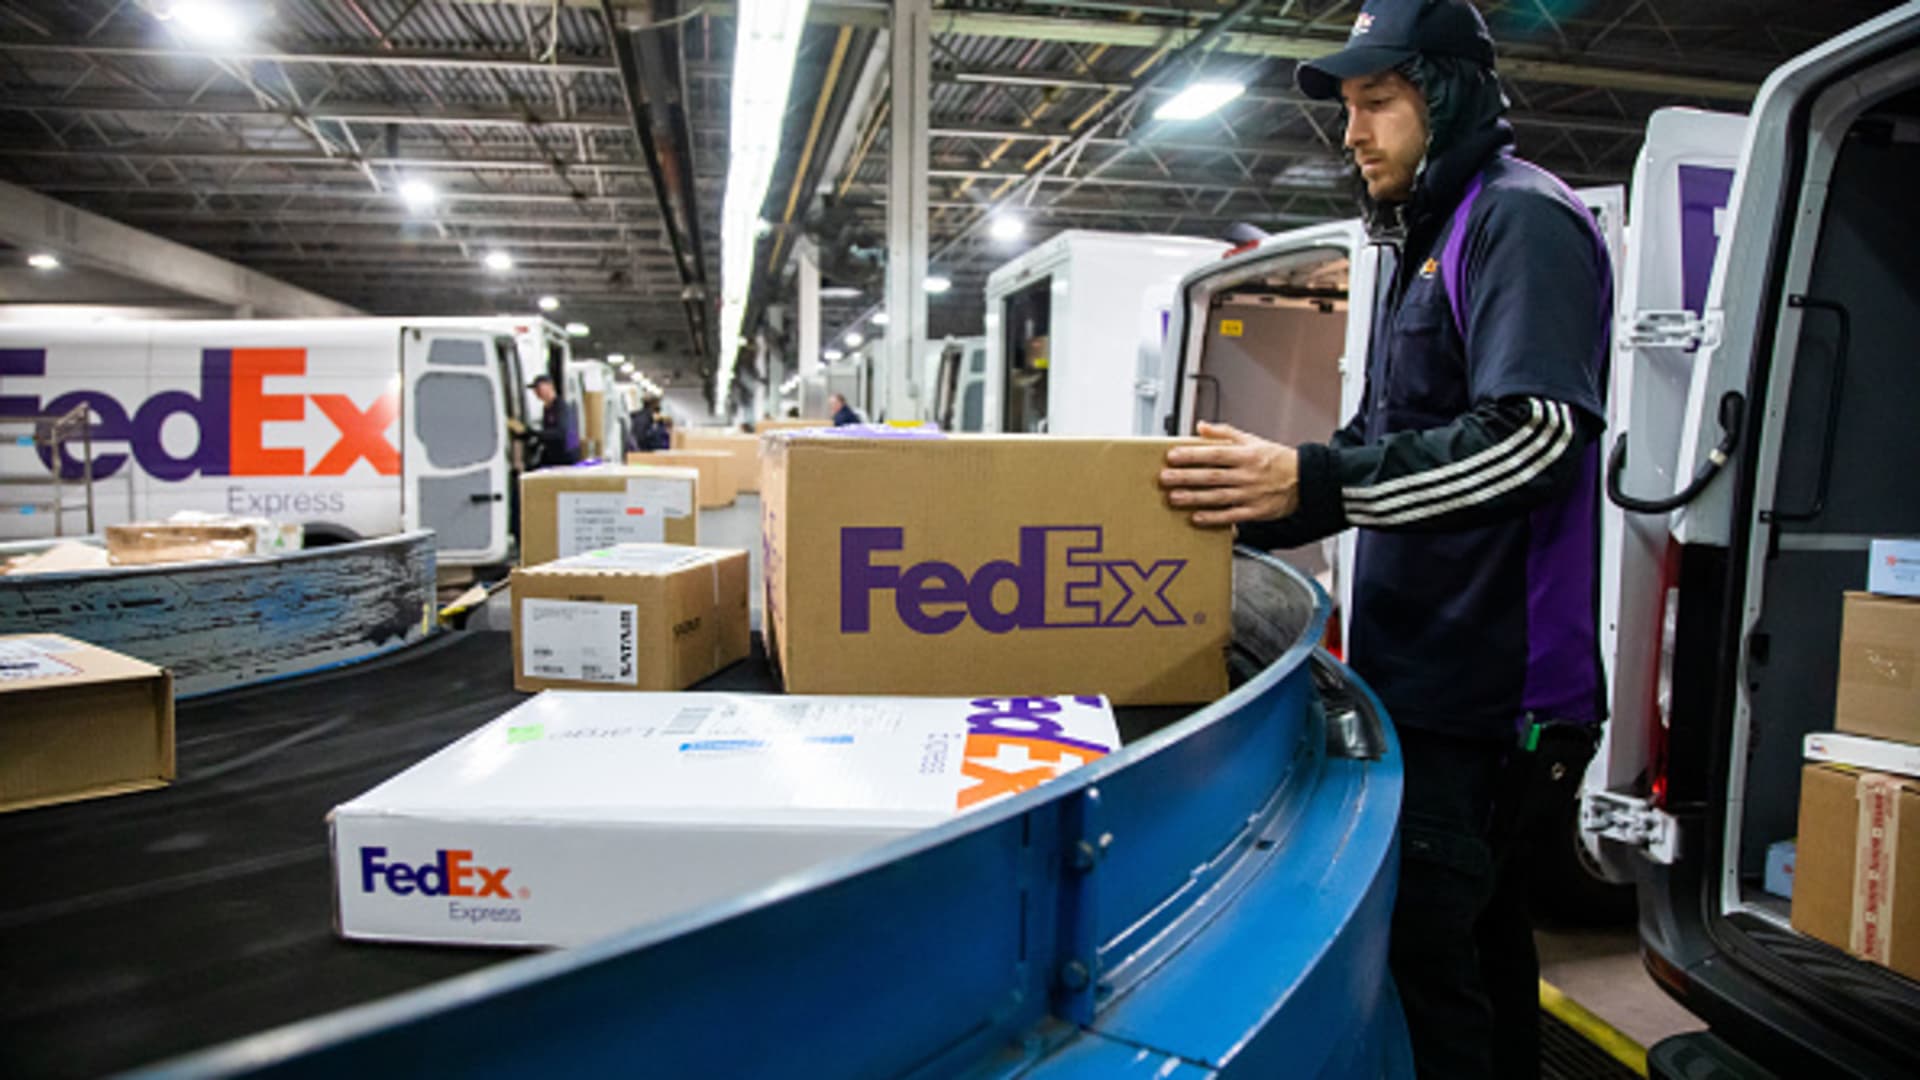 Stocks making the biggest moves after hours: FedEx, First Republic Bank and more